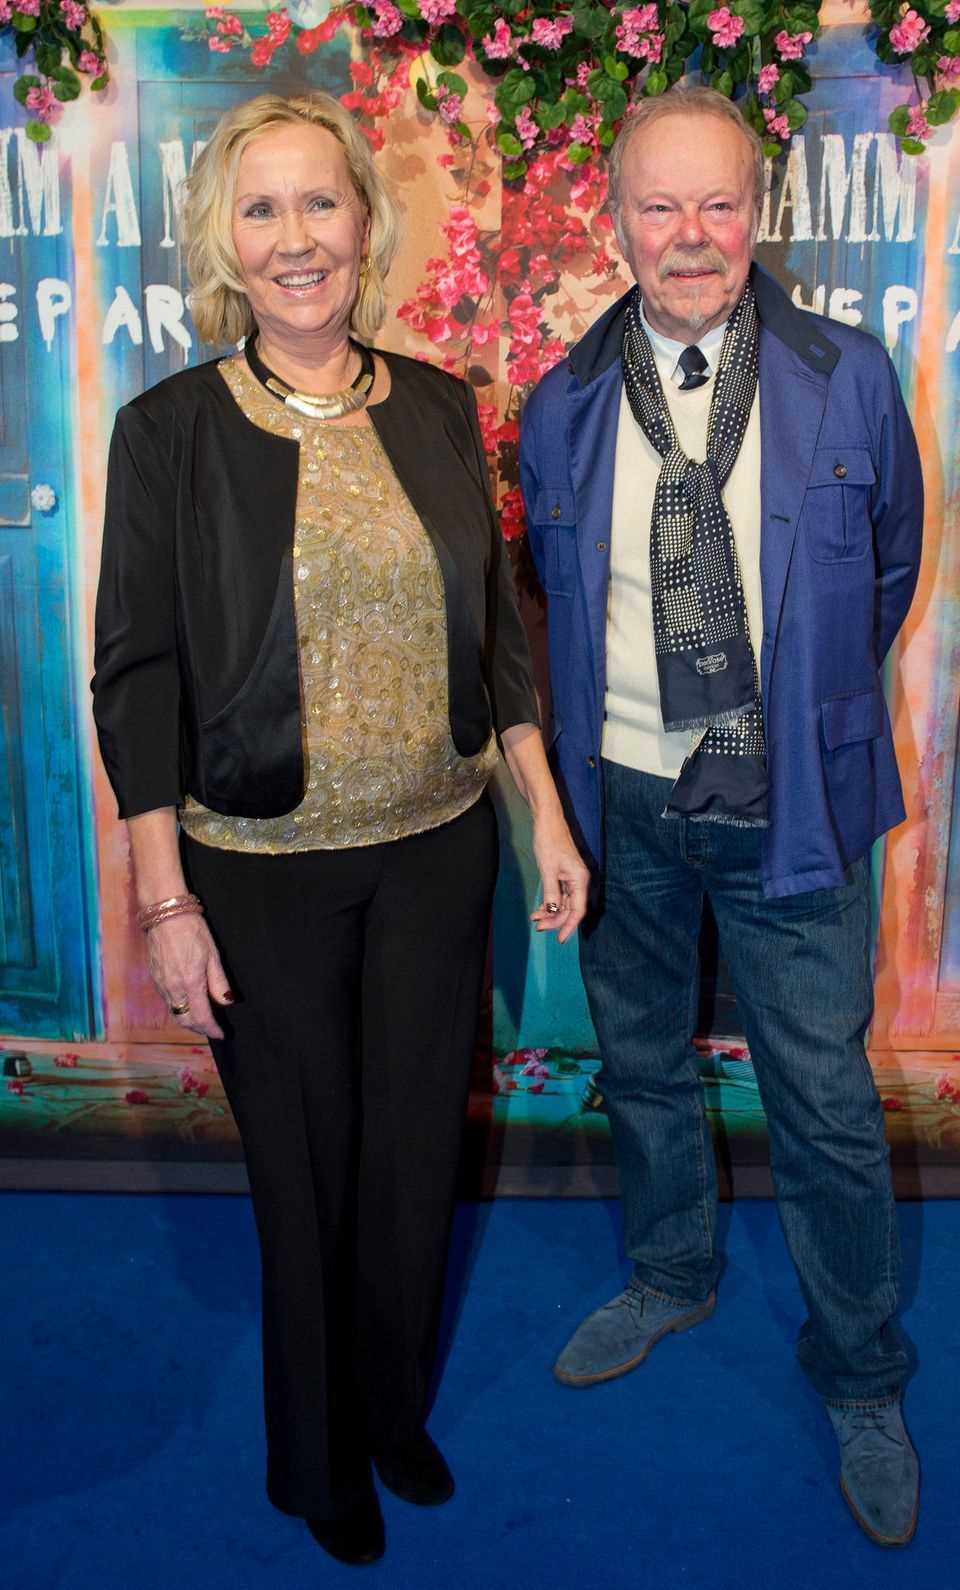 Agnetha Faltskog at the opening of "Mamma Mia!  The party"